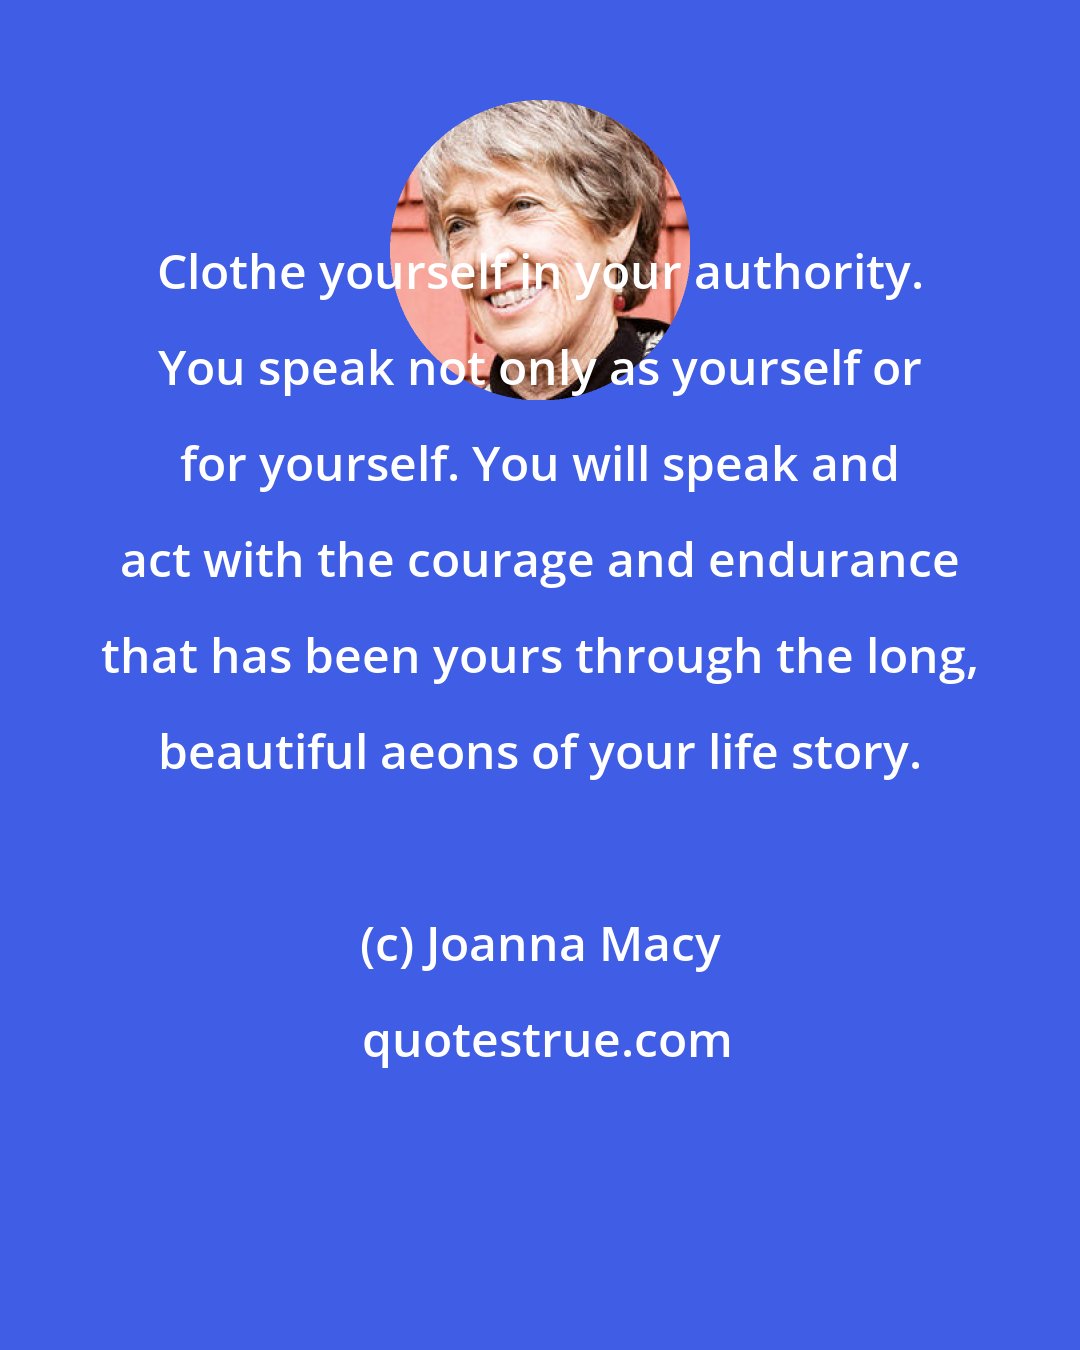 Joanna Macy: Clothe yourself in your authority. You speak not only as yourself or for yourself. You will speak and act with the courage and endurance that has been yours through the long, beautiful aeons of your life story.